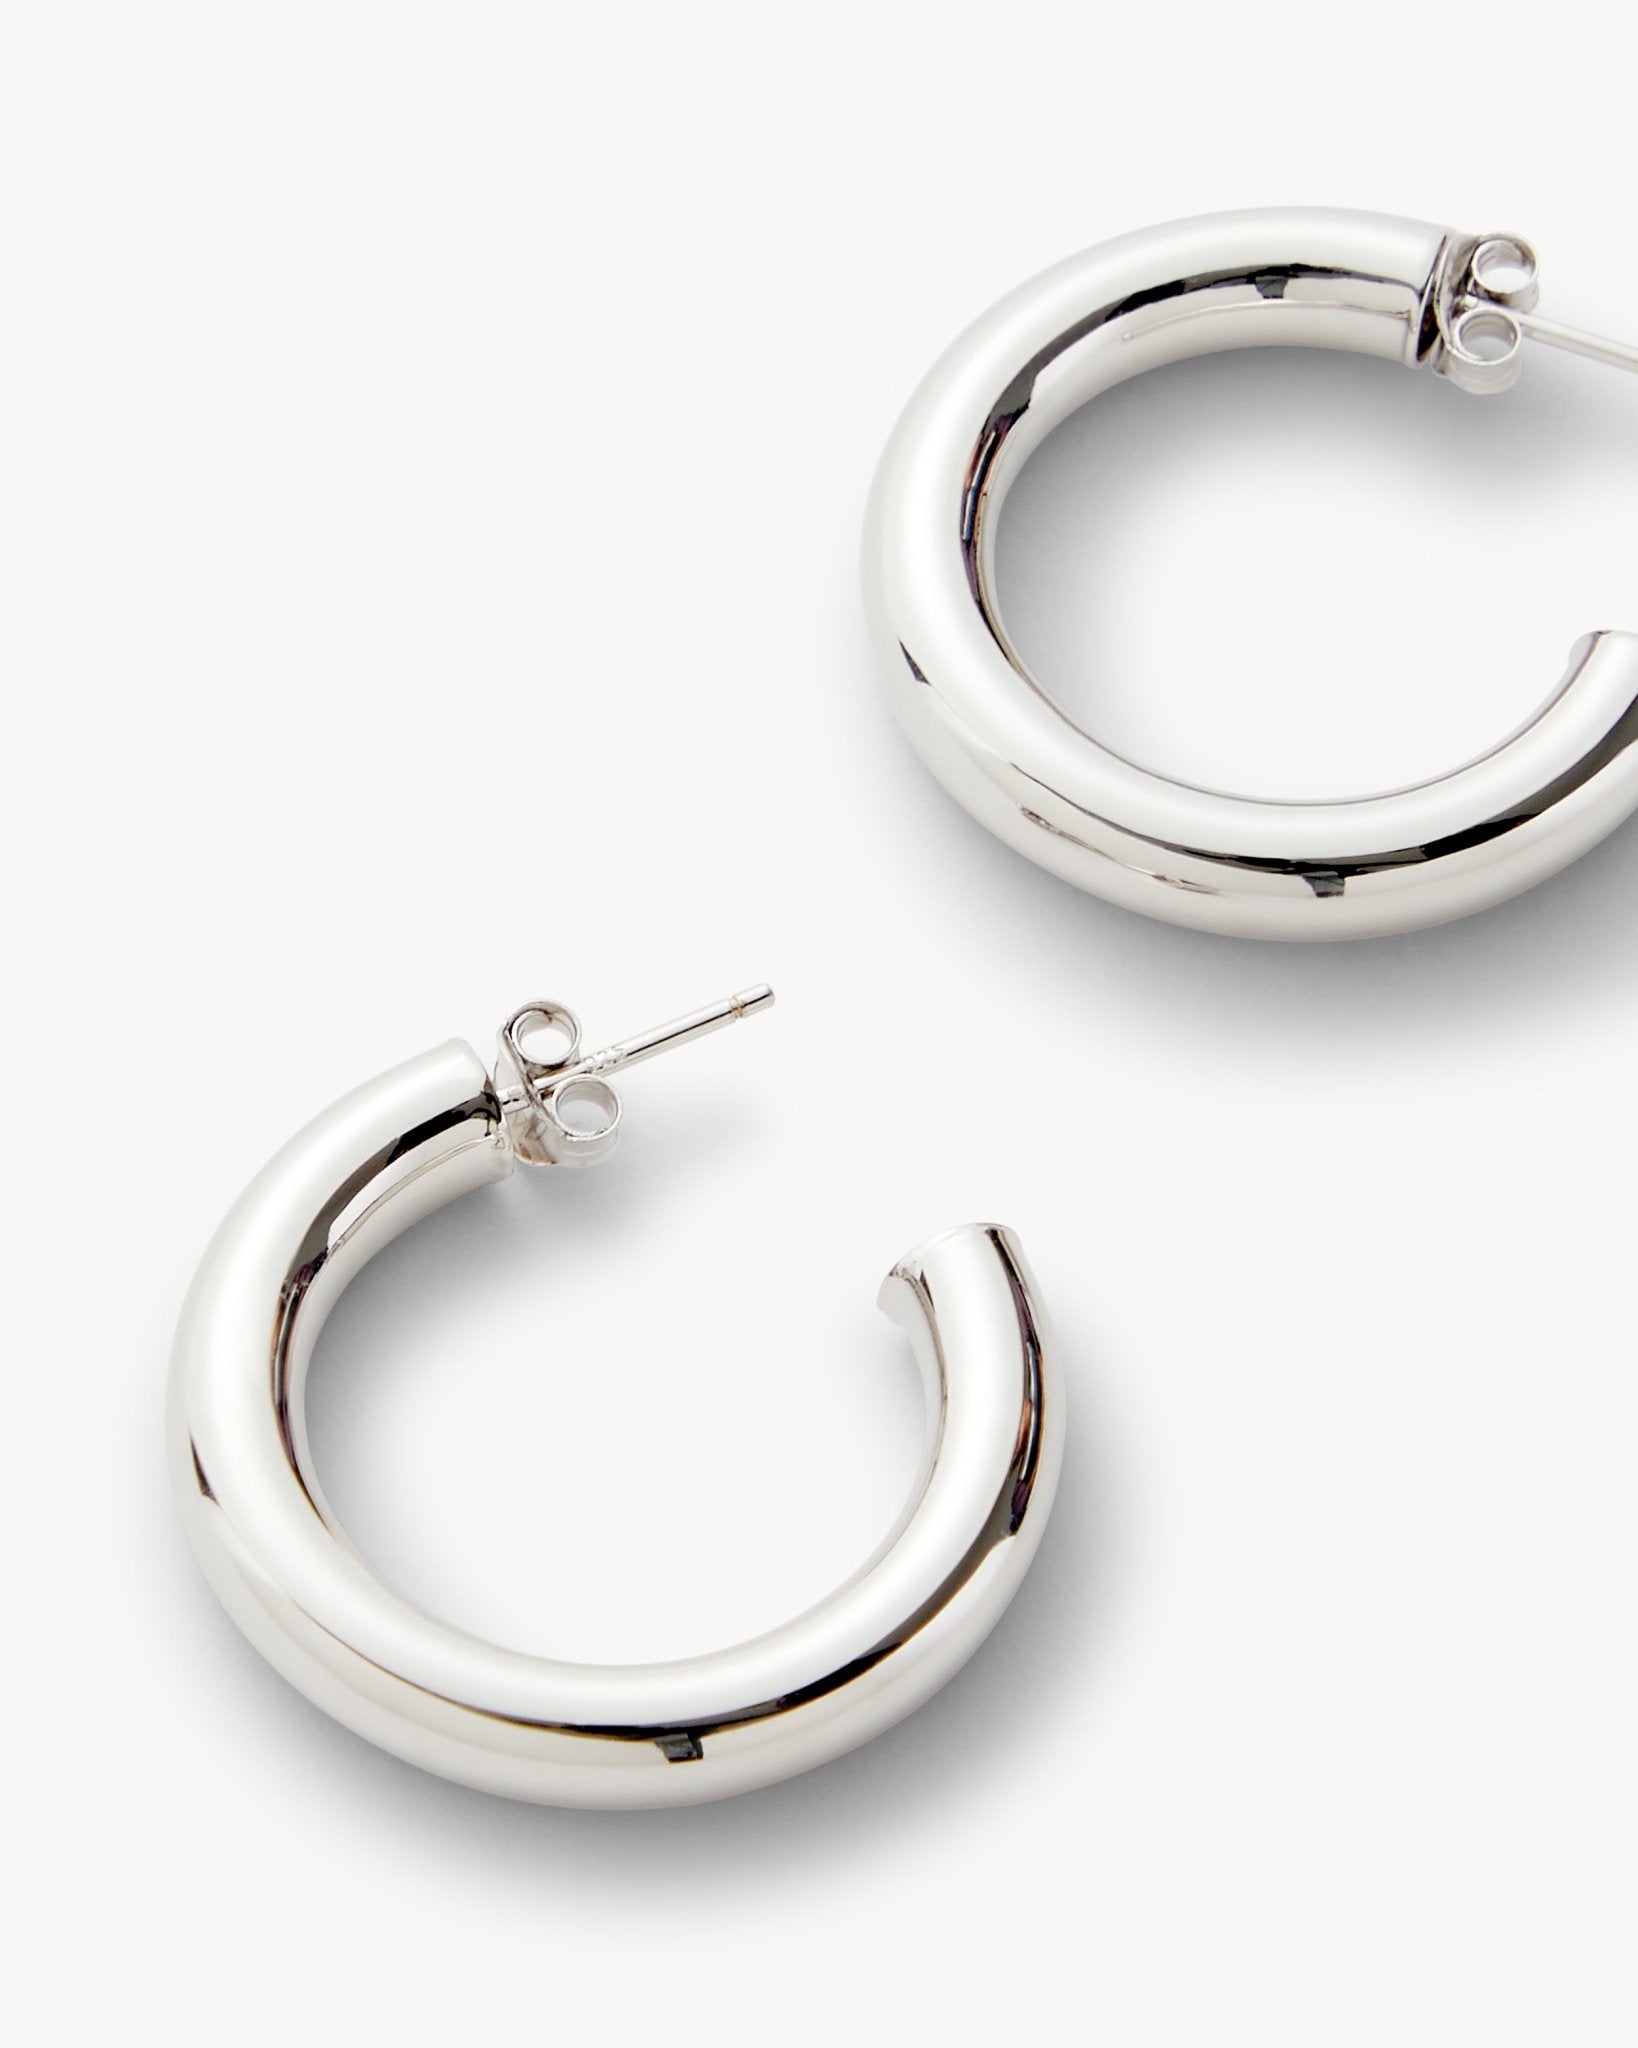 1" Perfect Hoops in Silver